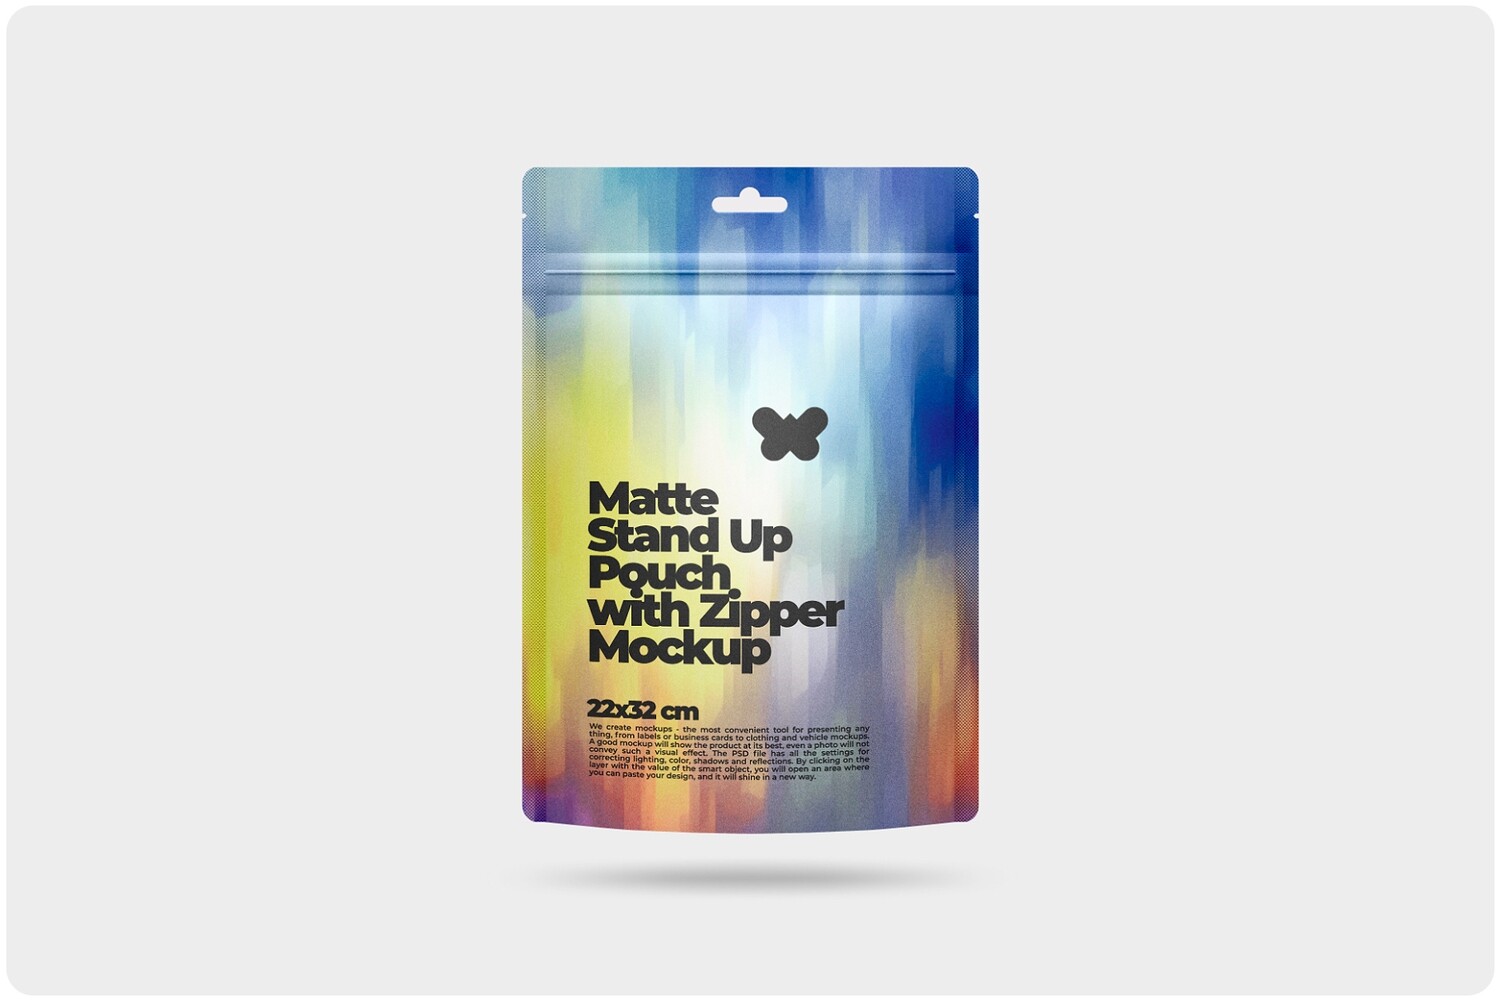 Paper Stand Up Pouch with Zipper Mockup 8,7x11,6in (22x32cm)